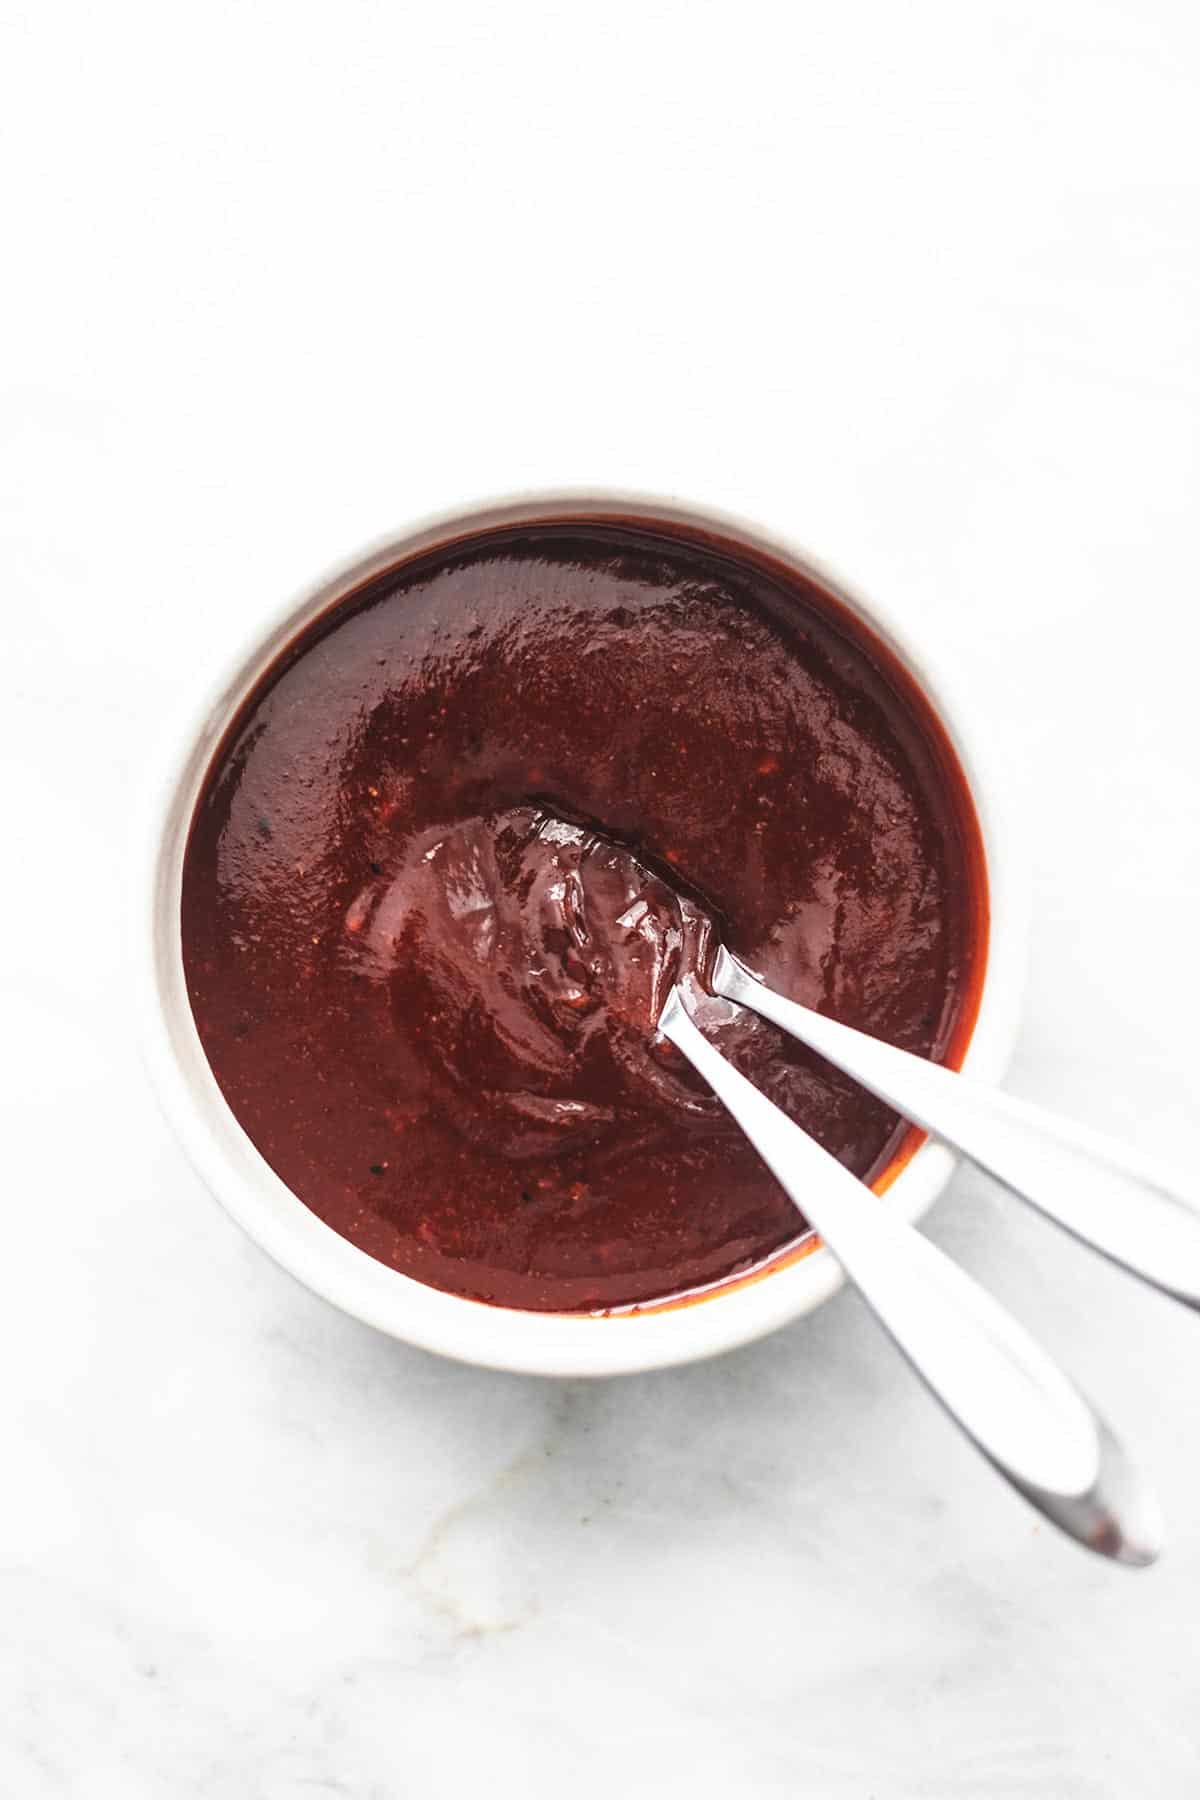 top view of bbq sauce in a bowl with two spoons.